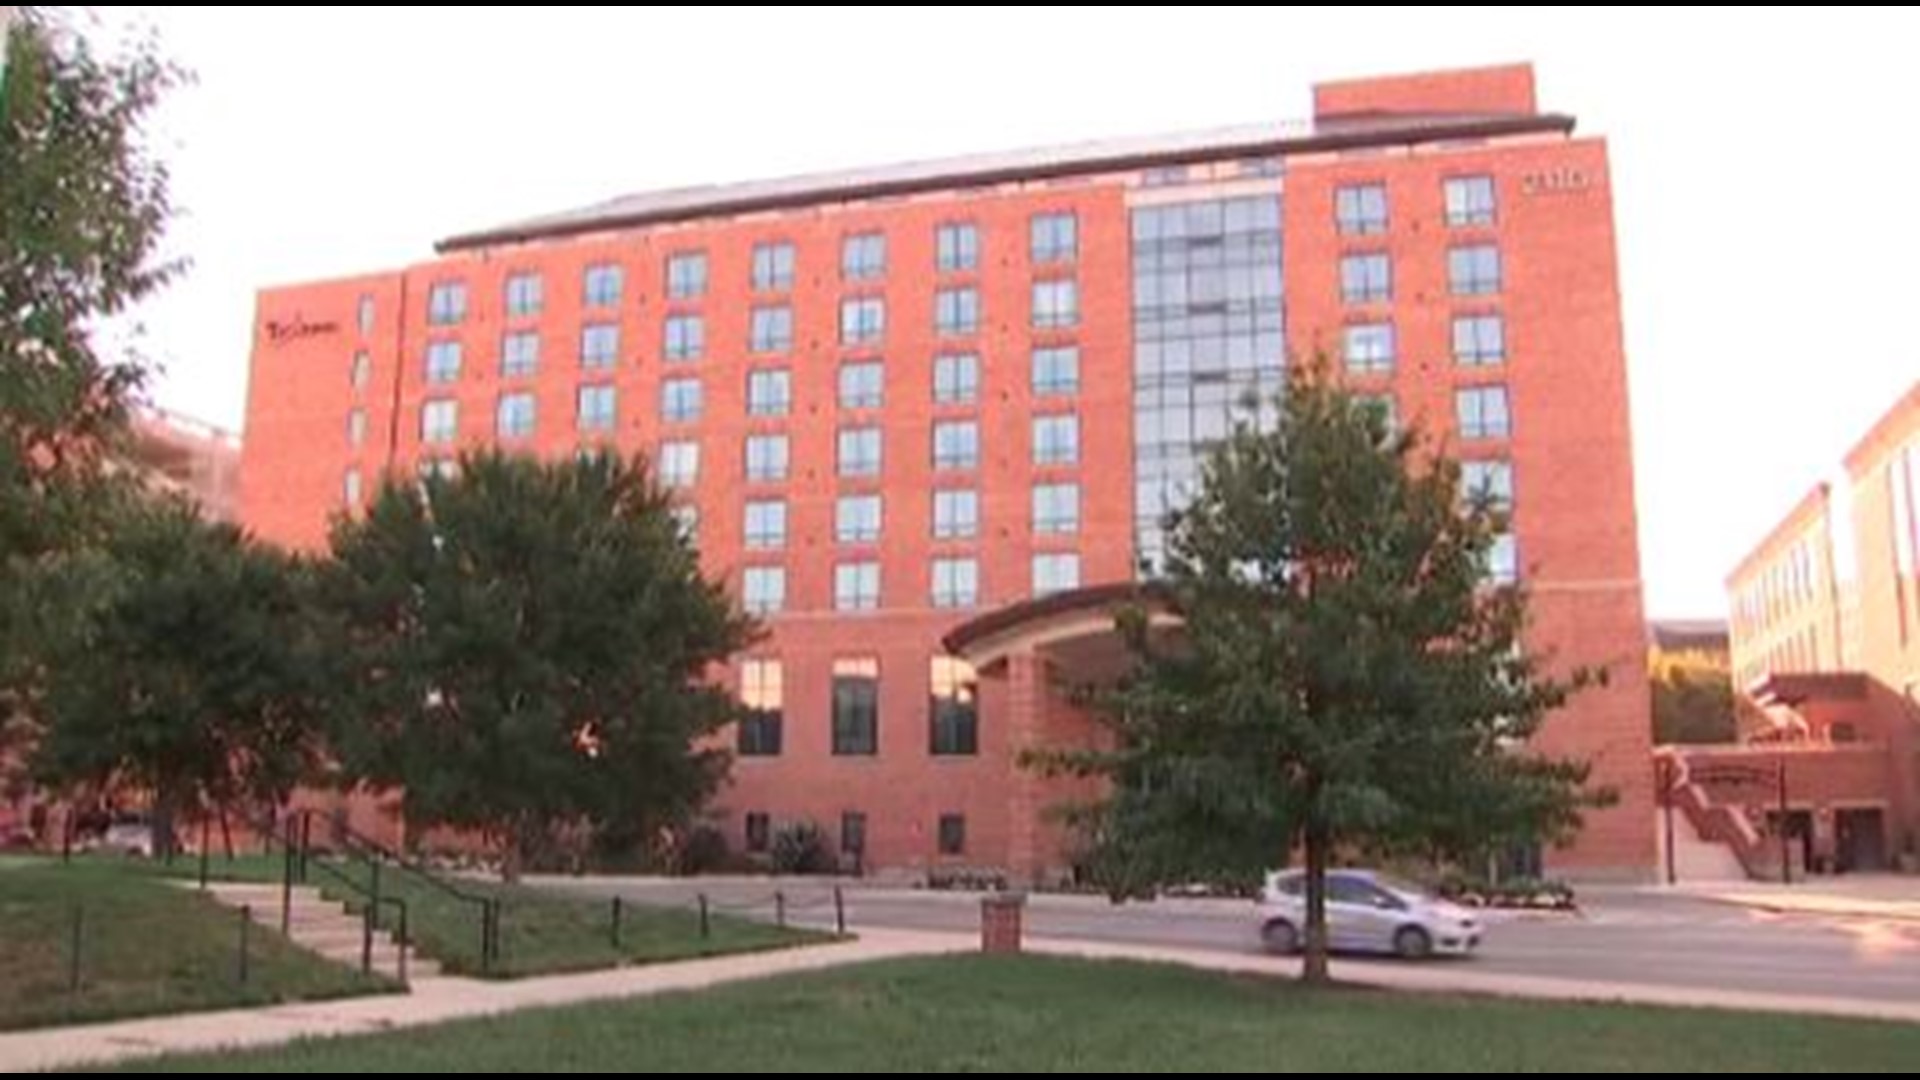 The Blackwell Inn is being used as dorms for some Ohio State students.